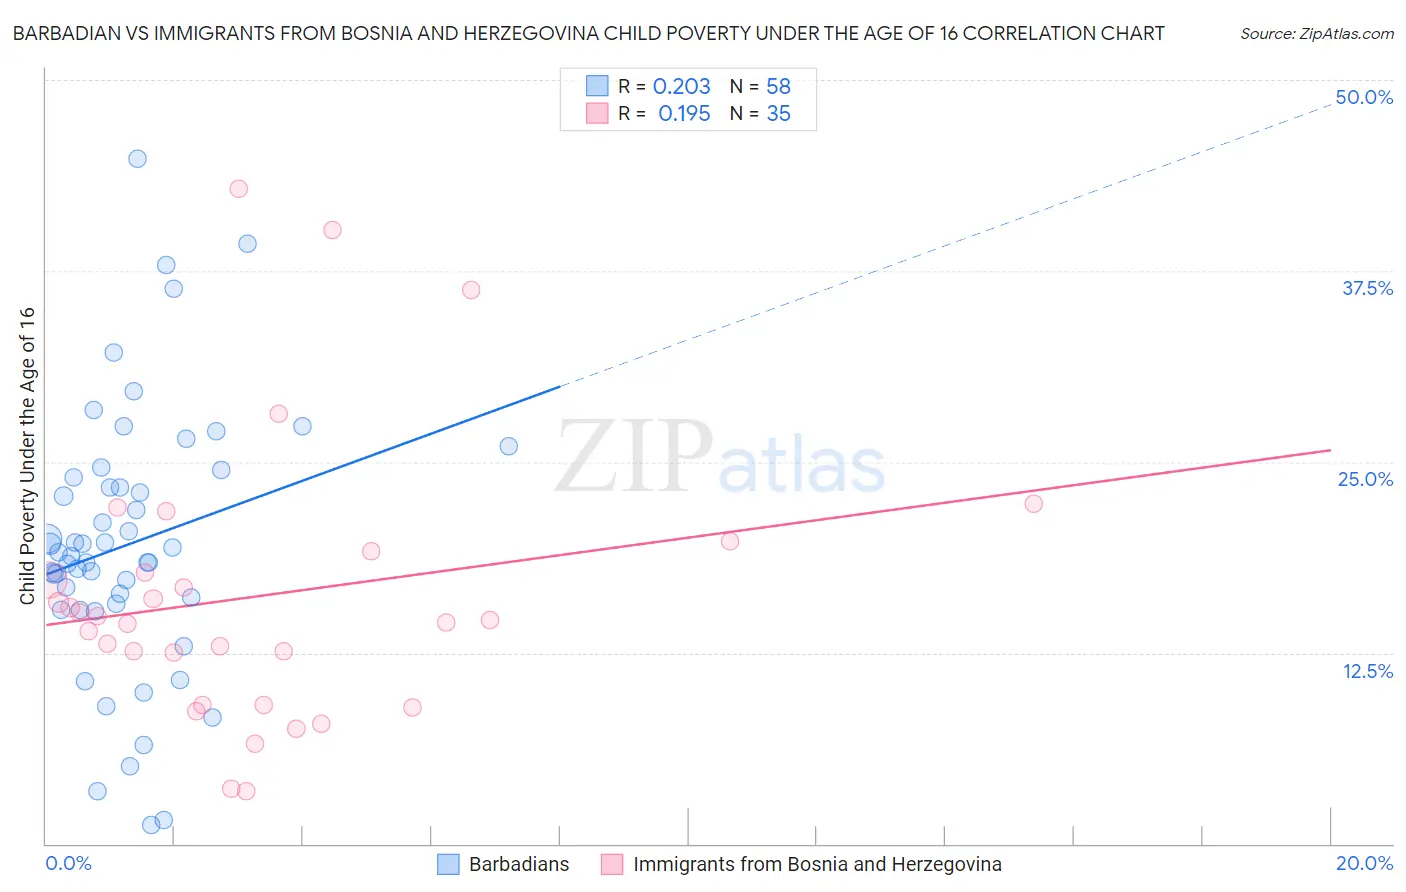 Barbadian vs Immigrants from Bosnia and Herzegovina Child Poverty Under the Age of 16